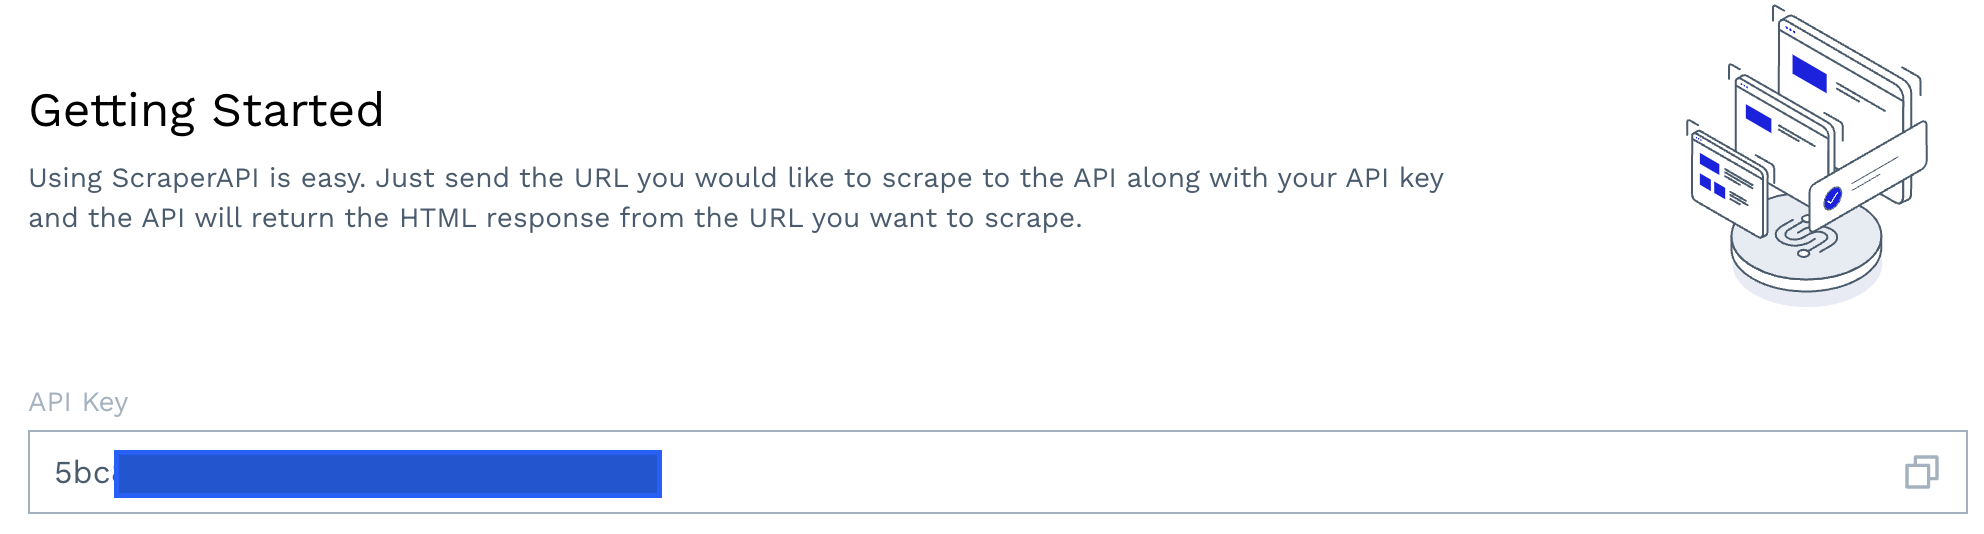 Getting Started with ScraperAPI